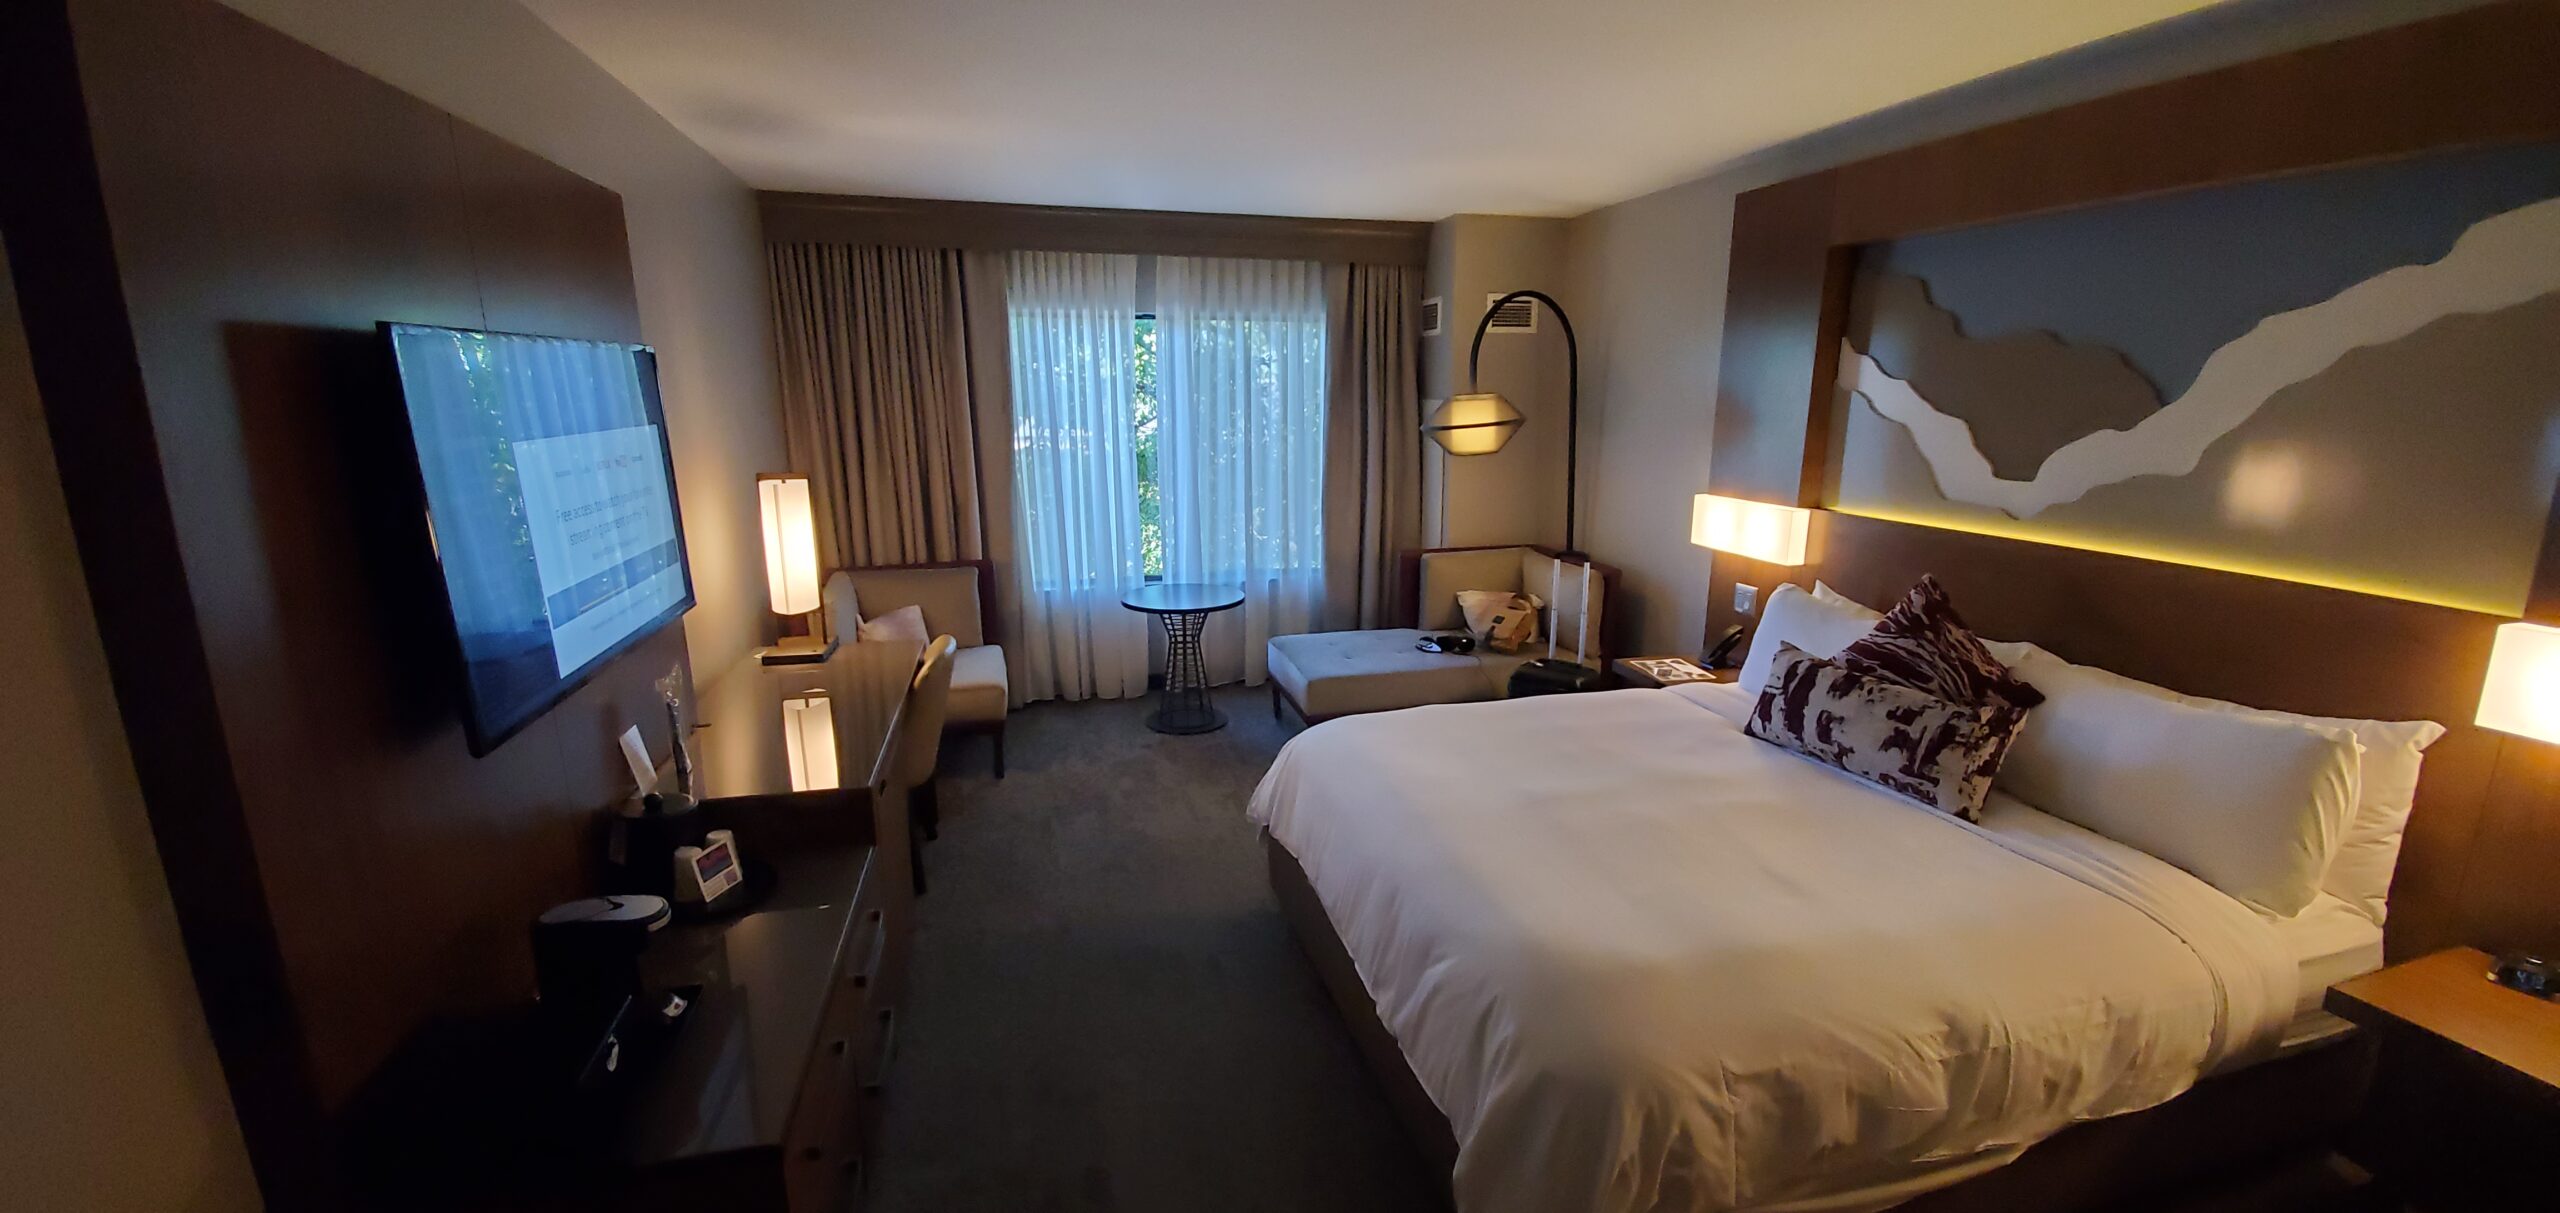 One view of the Meritage Resort hotel room.